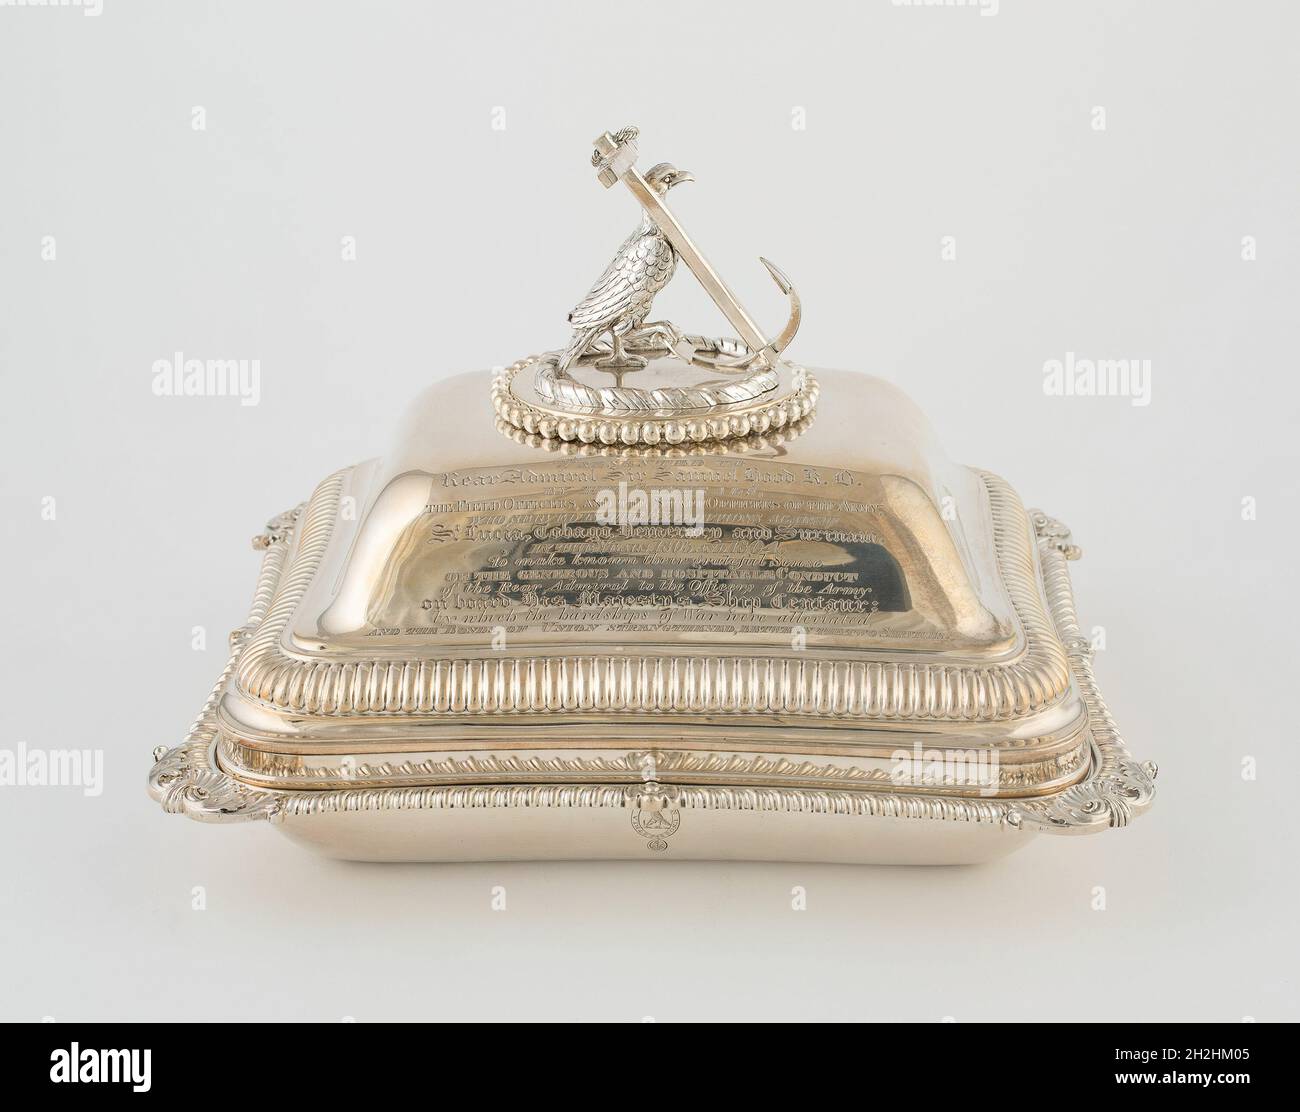 Entree Dish with Cover from the Hood Service, London, 1806/07. Stock Photo